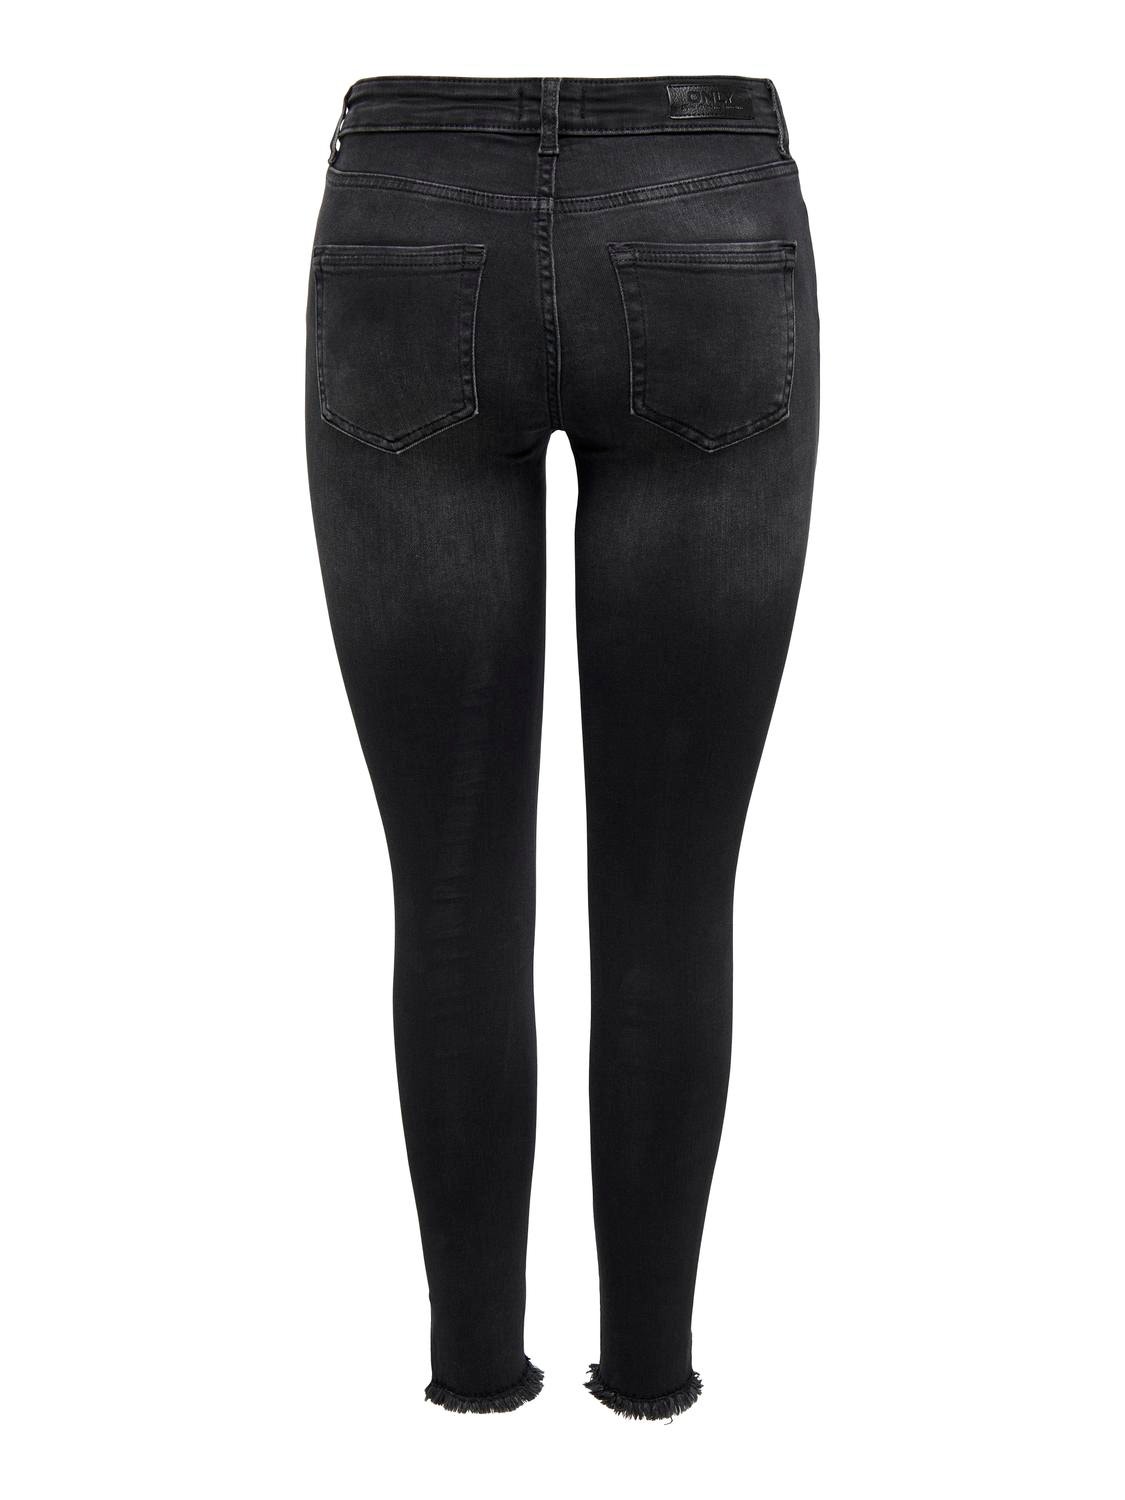 ONLBlush | Fit Jeans | Skinny Schwarz ONLY® ankle mid